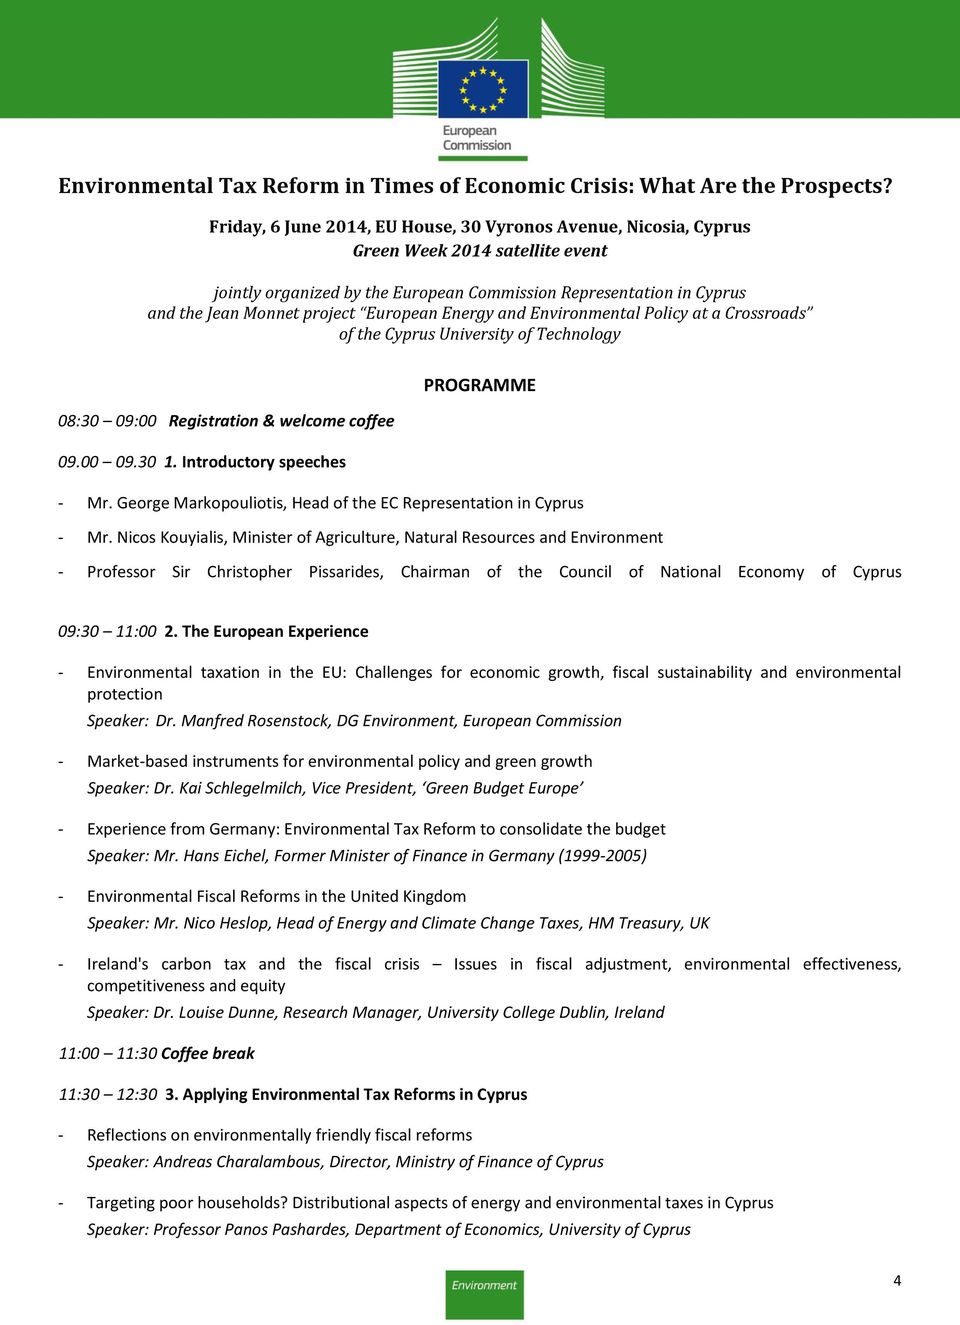 European Energy and Environmental Policy at a Crossroads of the Cyprus University of Technology PROGRAMME 08:30 09:00 Registration & welcome coffee 09.00 09.30 1. Introductory speeches - Mr.